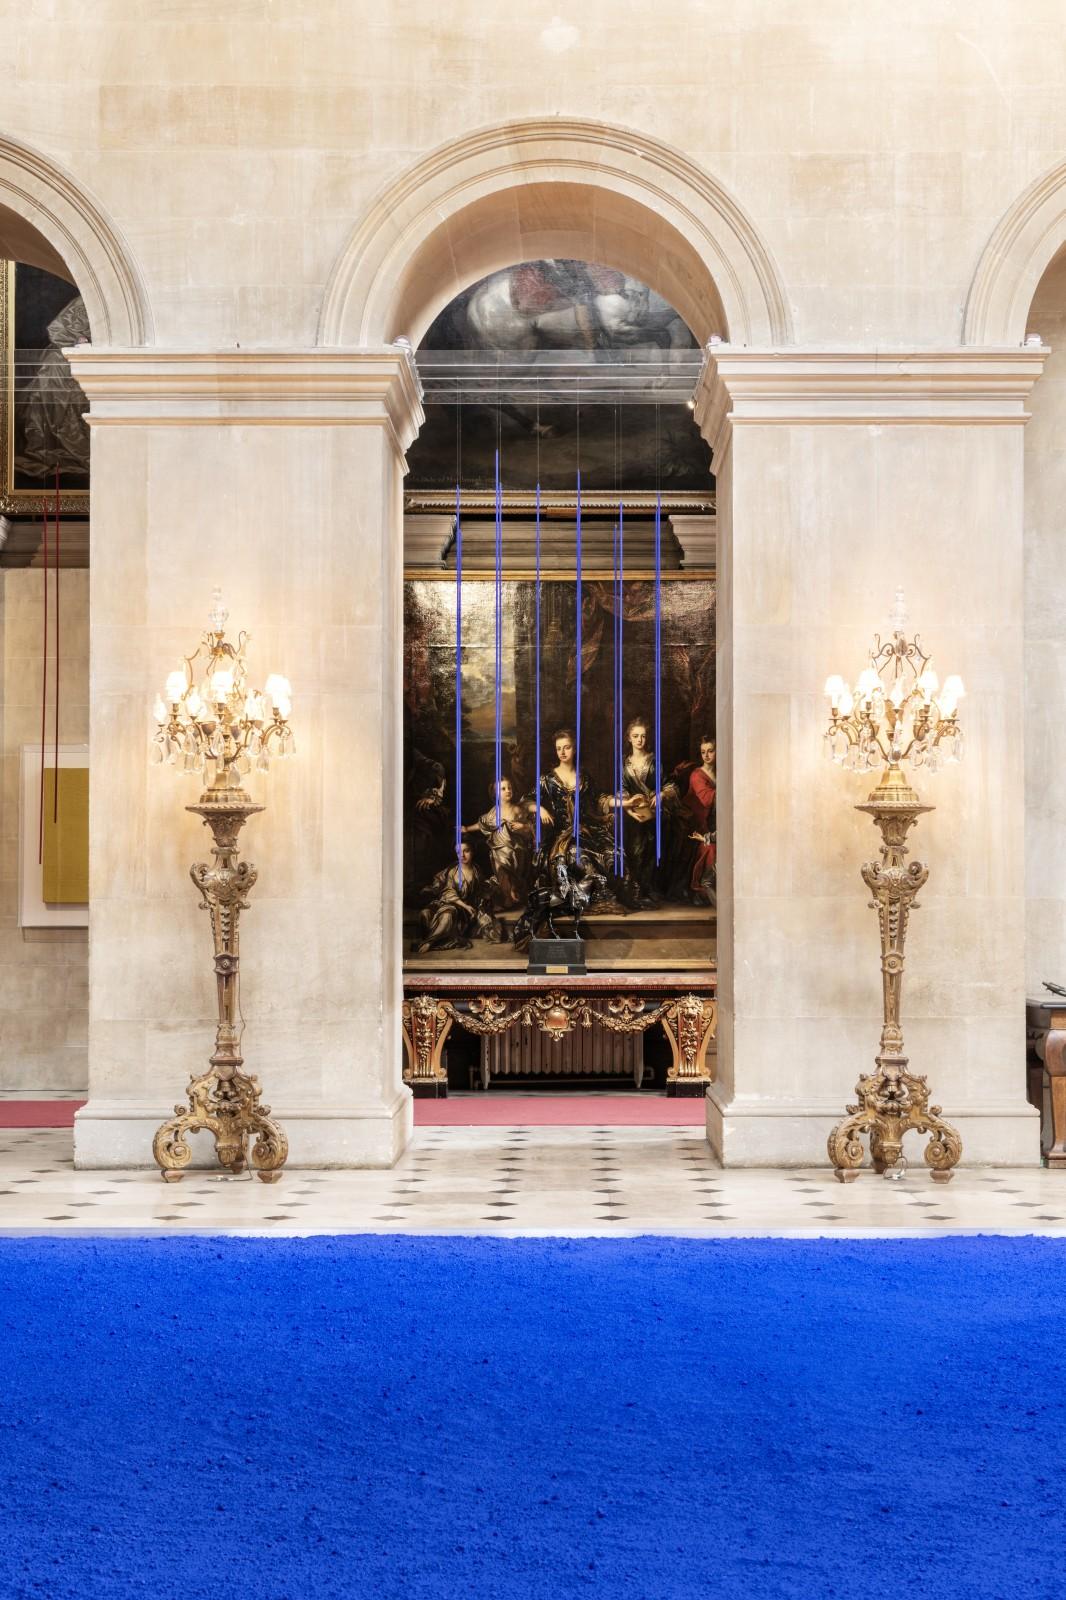 View of the exhibition "Yves Klein", Blenheim Palace, 2018 (S 36 I)